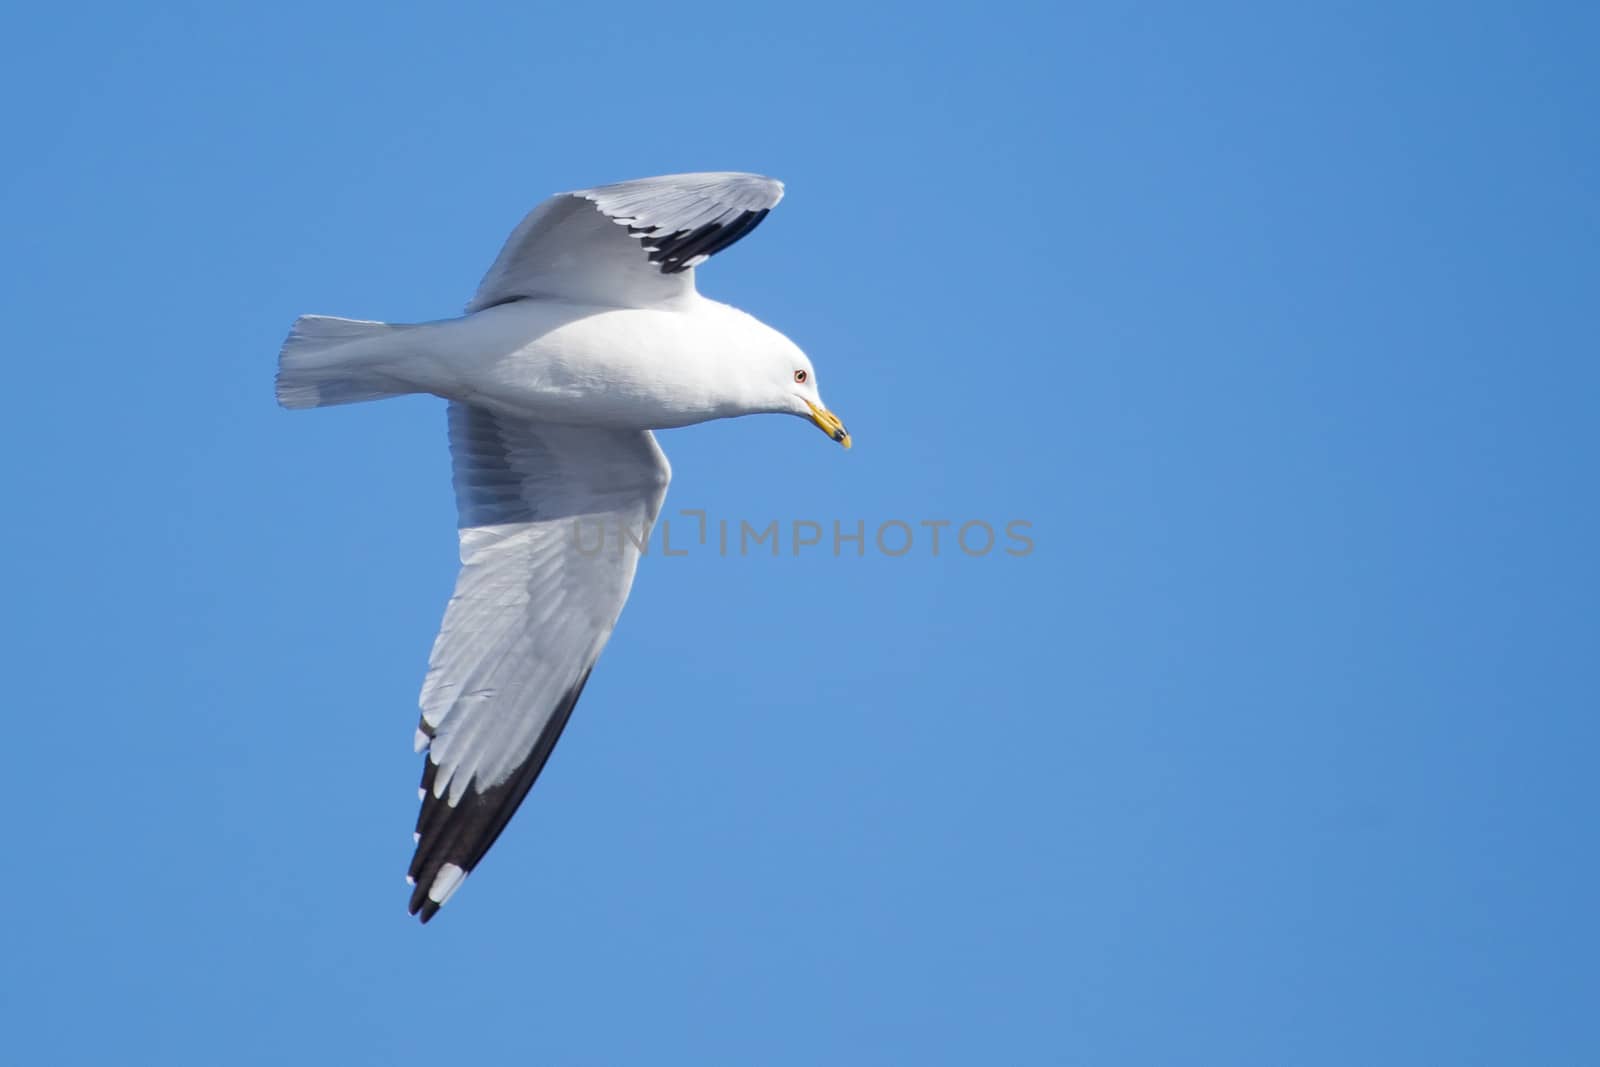 A seagull flying in the blue sky.